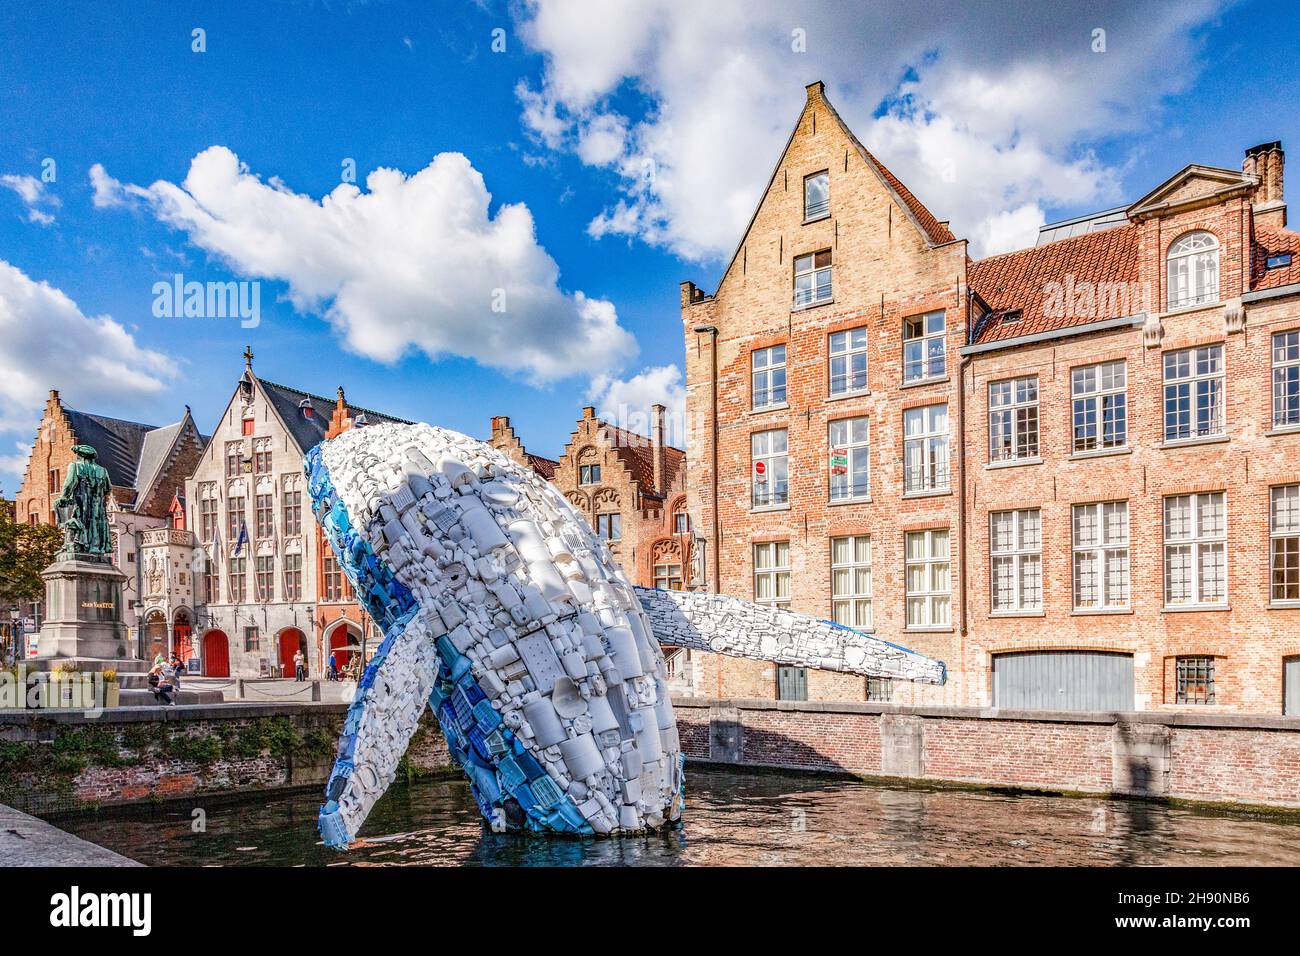 25 September 2018: Bruges, Belgium - The Bruges Whale, known as Skyscraper, made from  5 tons of plastic waste pulled out of the Pacific Ocean, for th Stock Photo